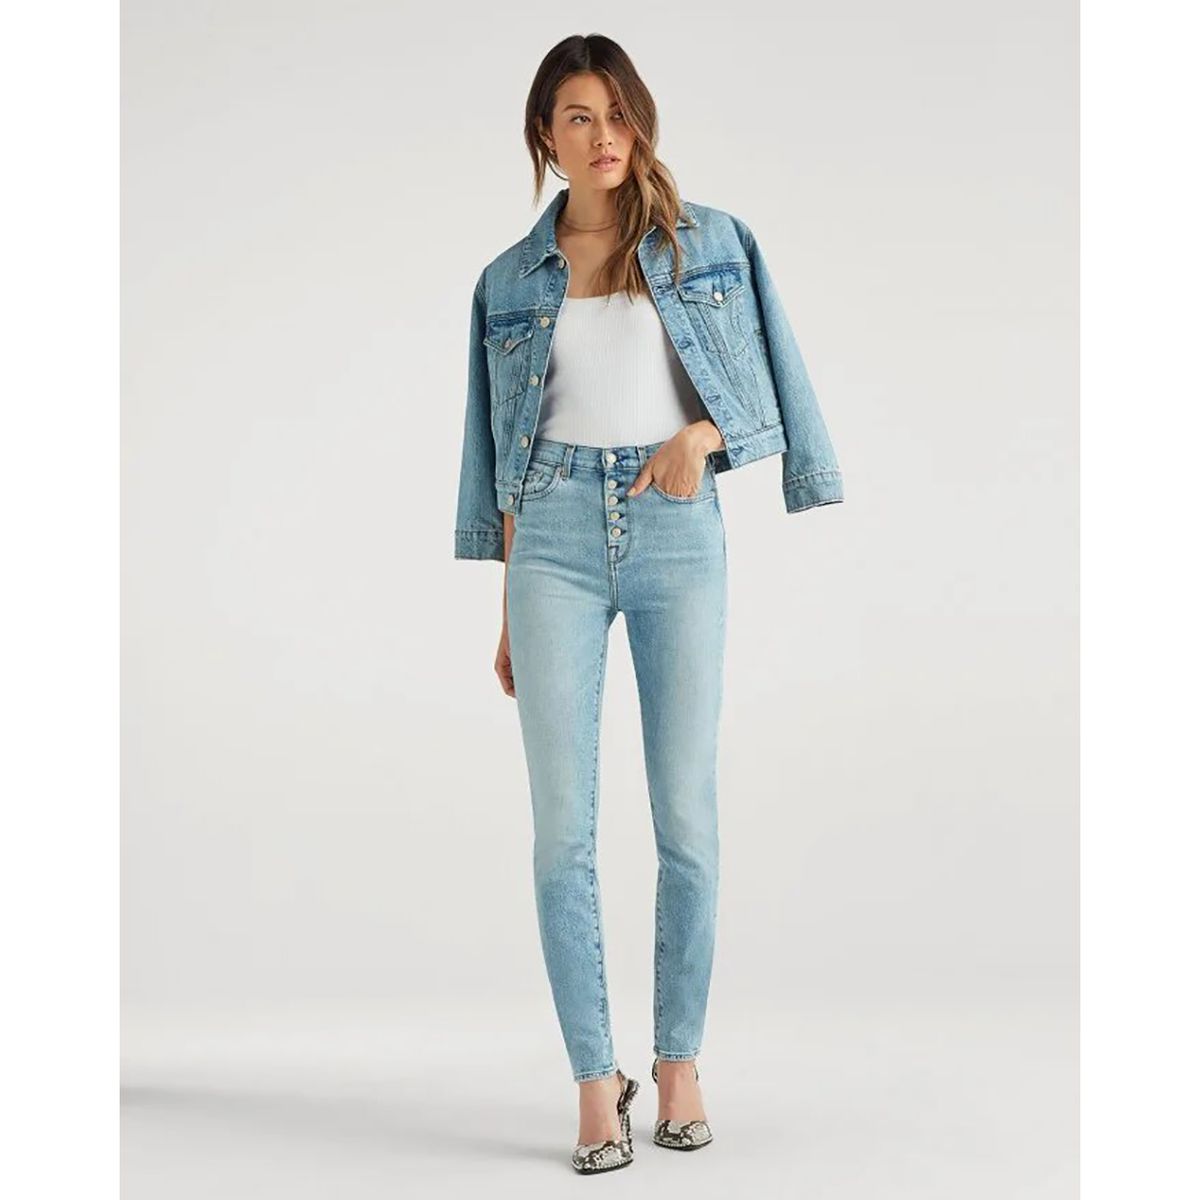 7 For All Mankind Is Having a Summer Sale on Jeans | InStyle